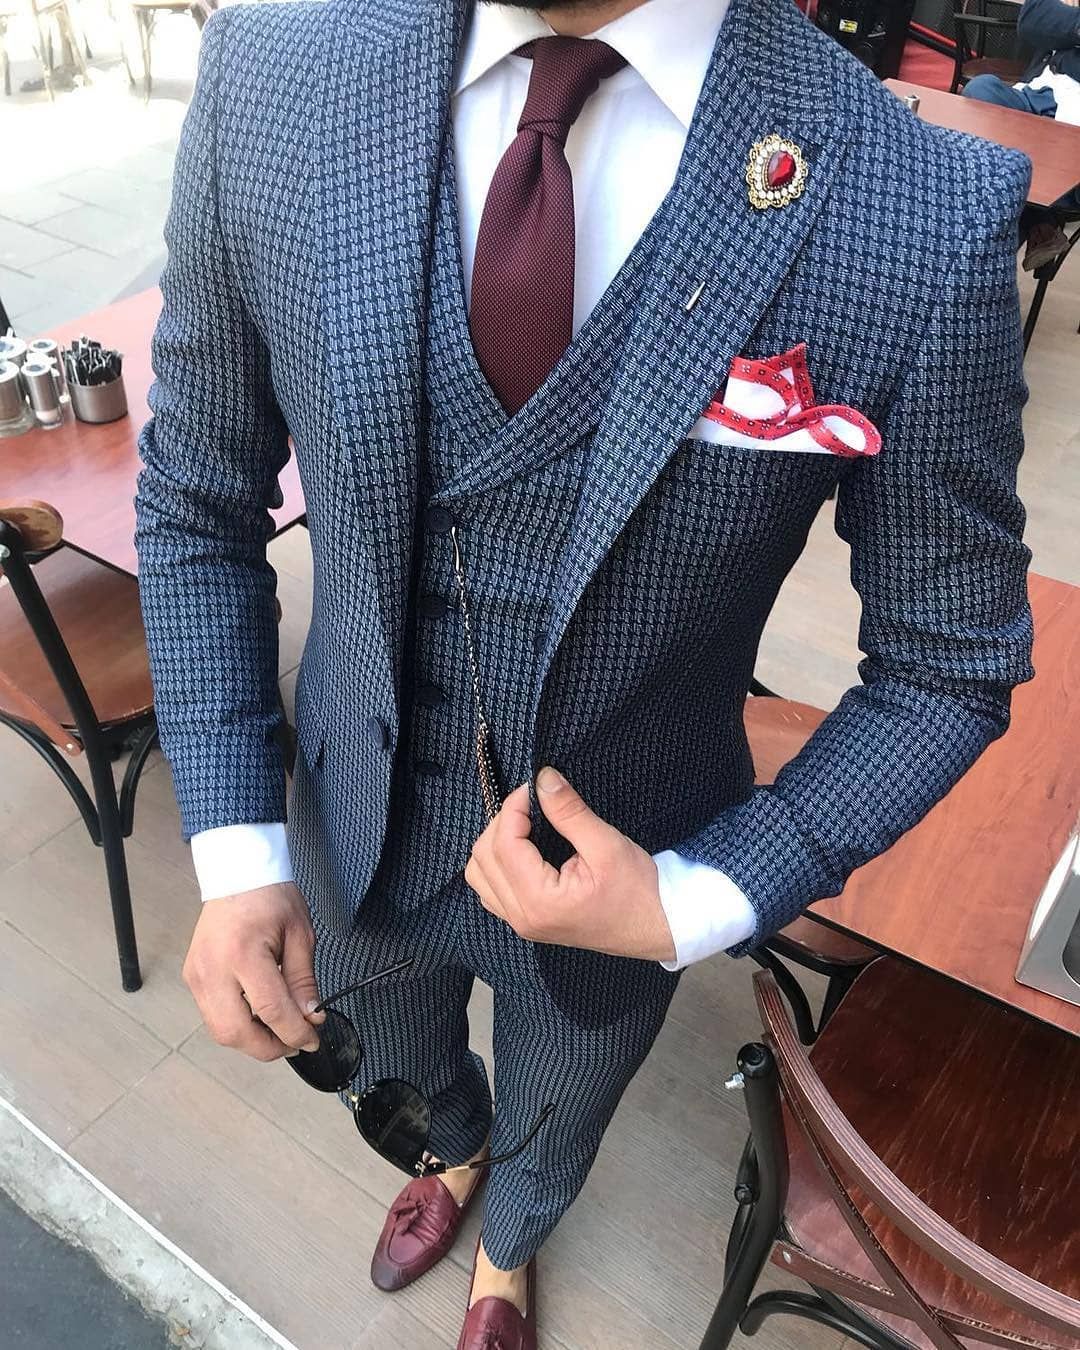 Bespoke Suits, Suit Separates, and Shirts | Giorgenti